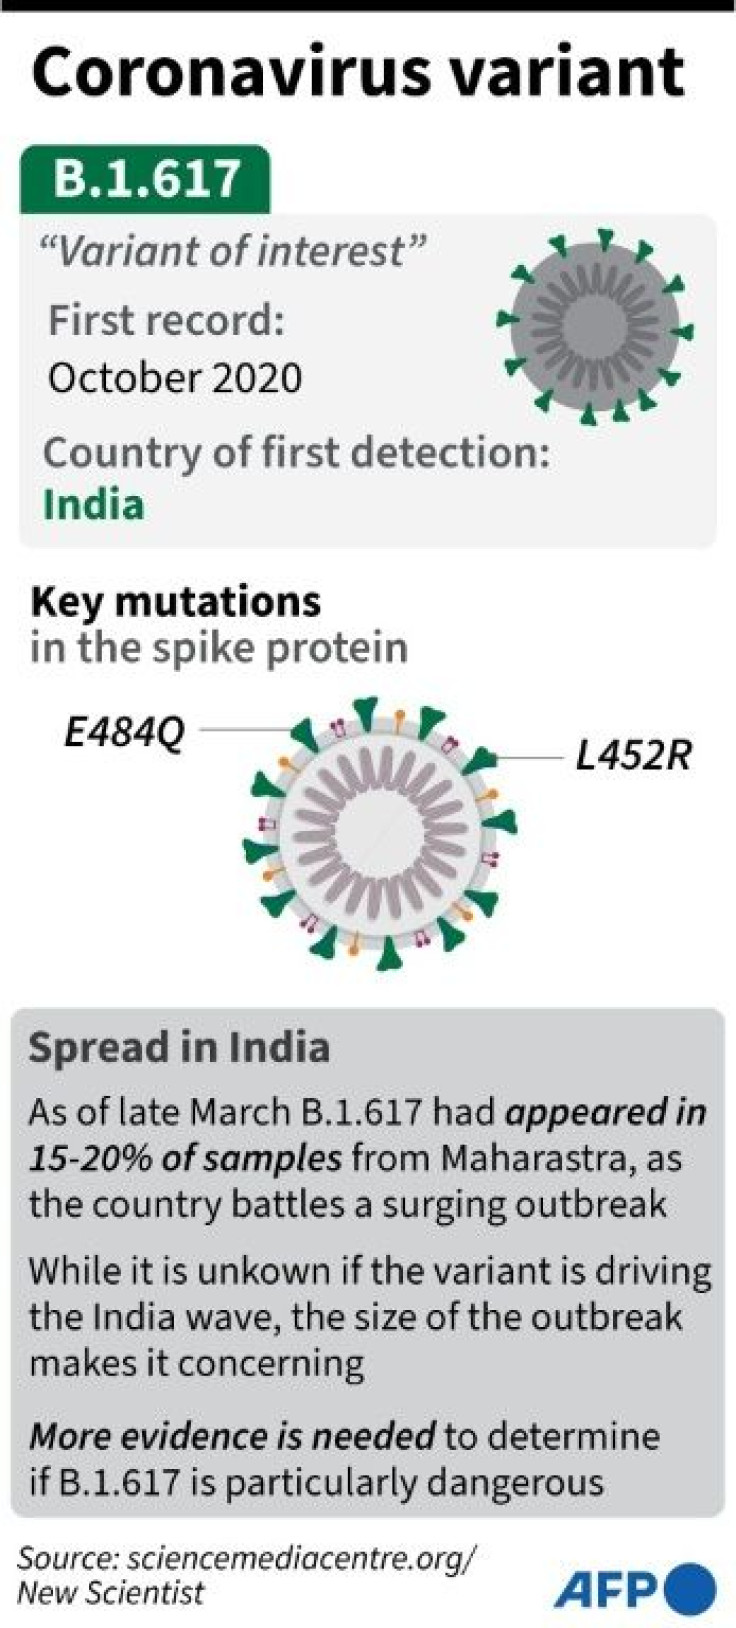 Factfile on the B.1.617 variant of SARS-CoV2 now circulating widely in India